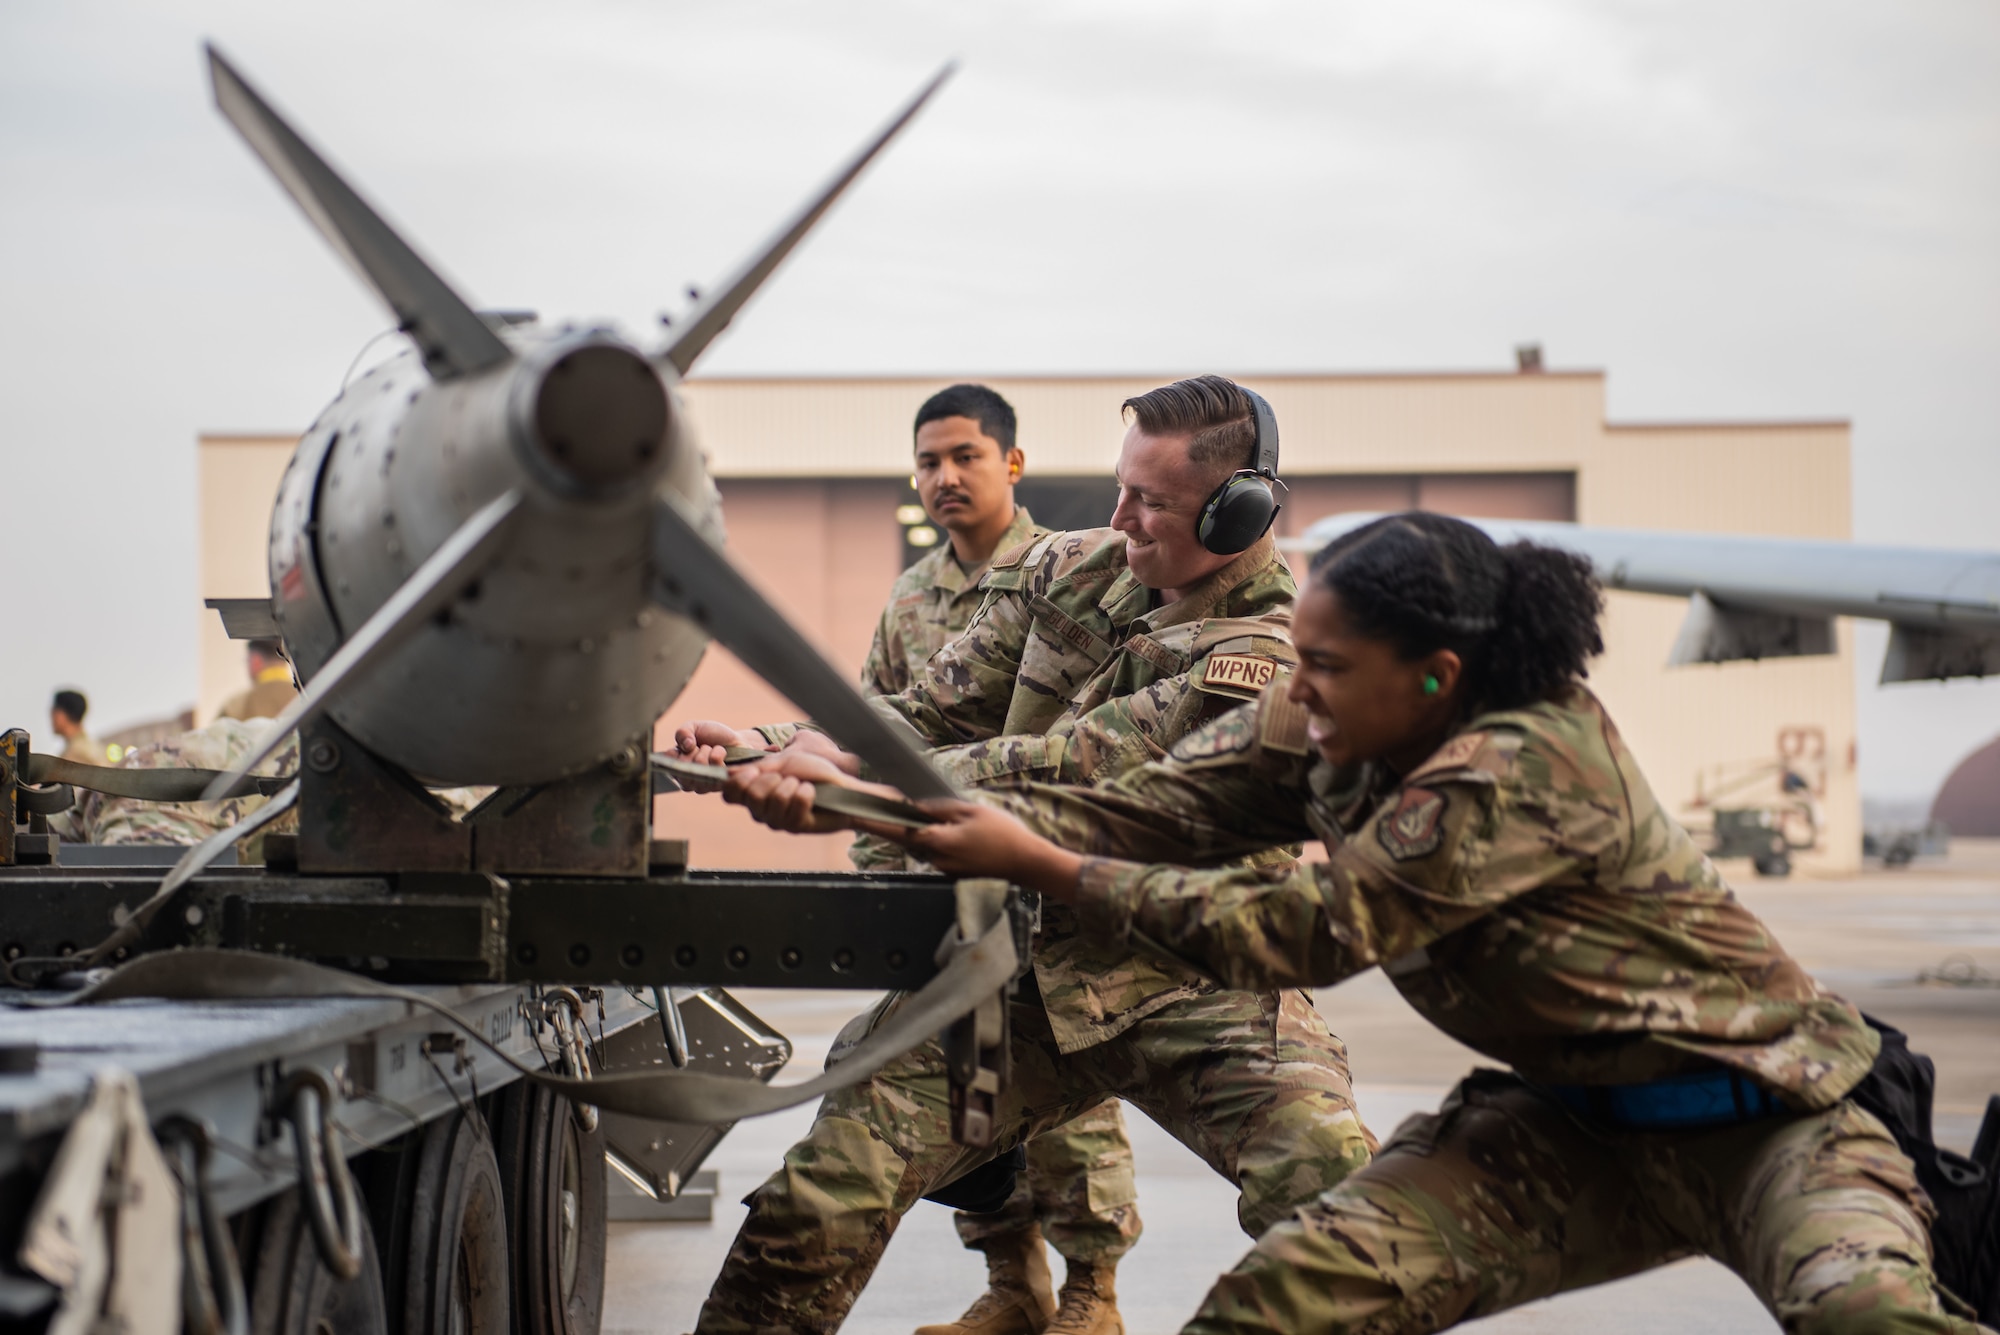 U.S. Air Force Staff Sgt. Kenyah Smith and Senior Airman Dillon Golden, 25th Fighter Generation Squadron weapons load crew members, prepare a GBU-31V3 munition to load onto an A-10C Thunderbolt II during a weapons load crew of the quarter competition